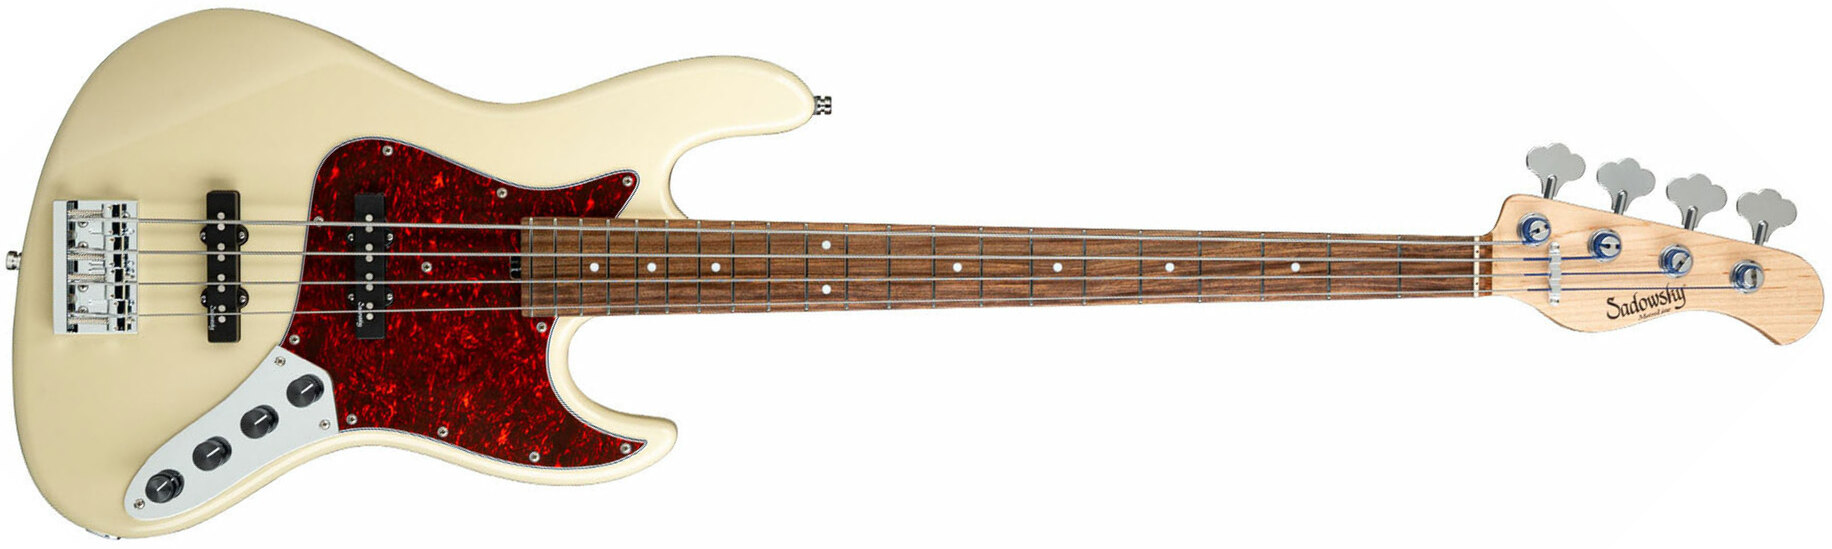 Sadowsky Modern Bass 24 Fret Alder 4c Metroline All Active Mor - Solid Olympic White - Solidbody E-bass - Main picture